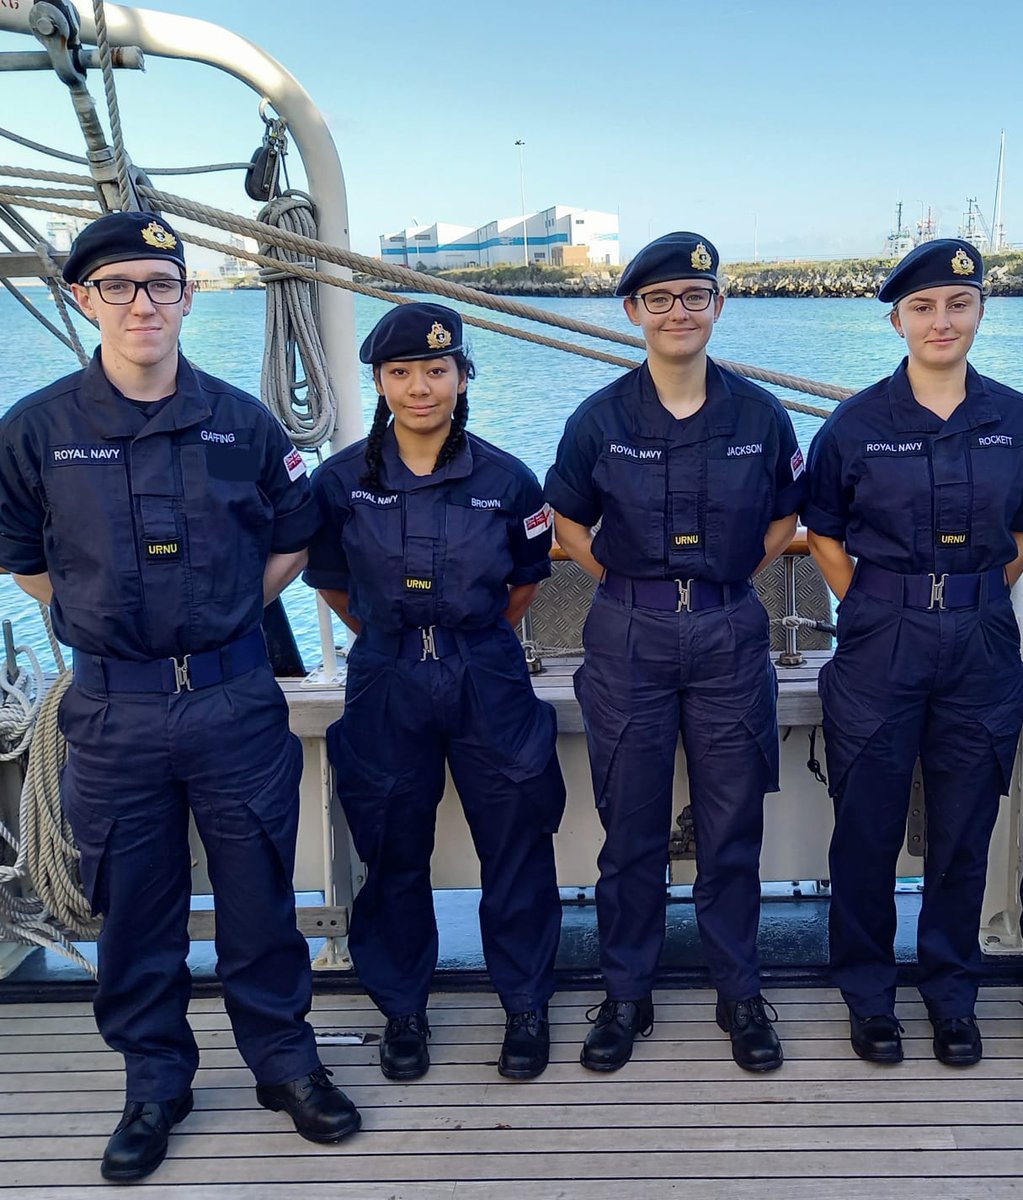 NURNU Office Cadets about to sail on SV Tenacious, a JST tall ship, learning marinisation, making new friends with other URNU's, as well as Cambridge UOTC.